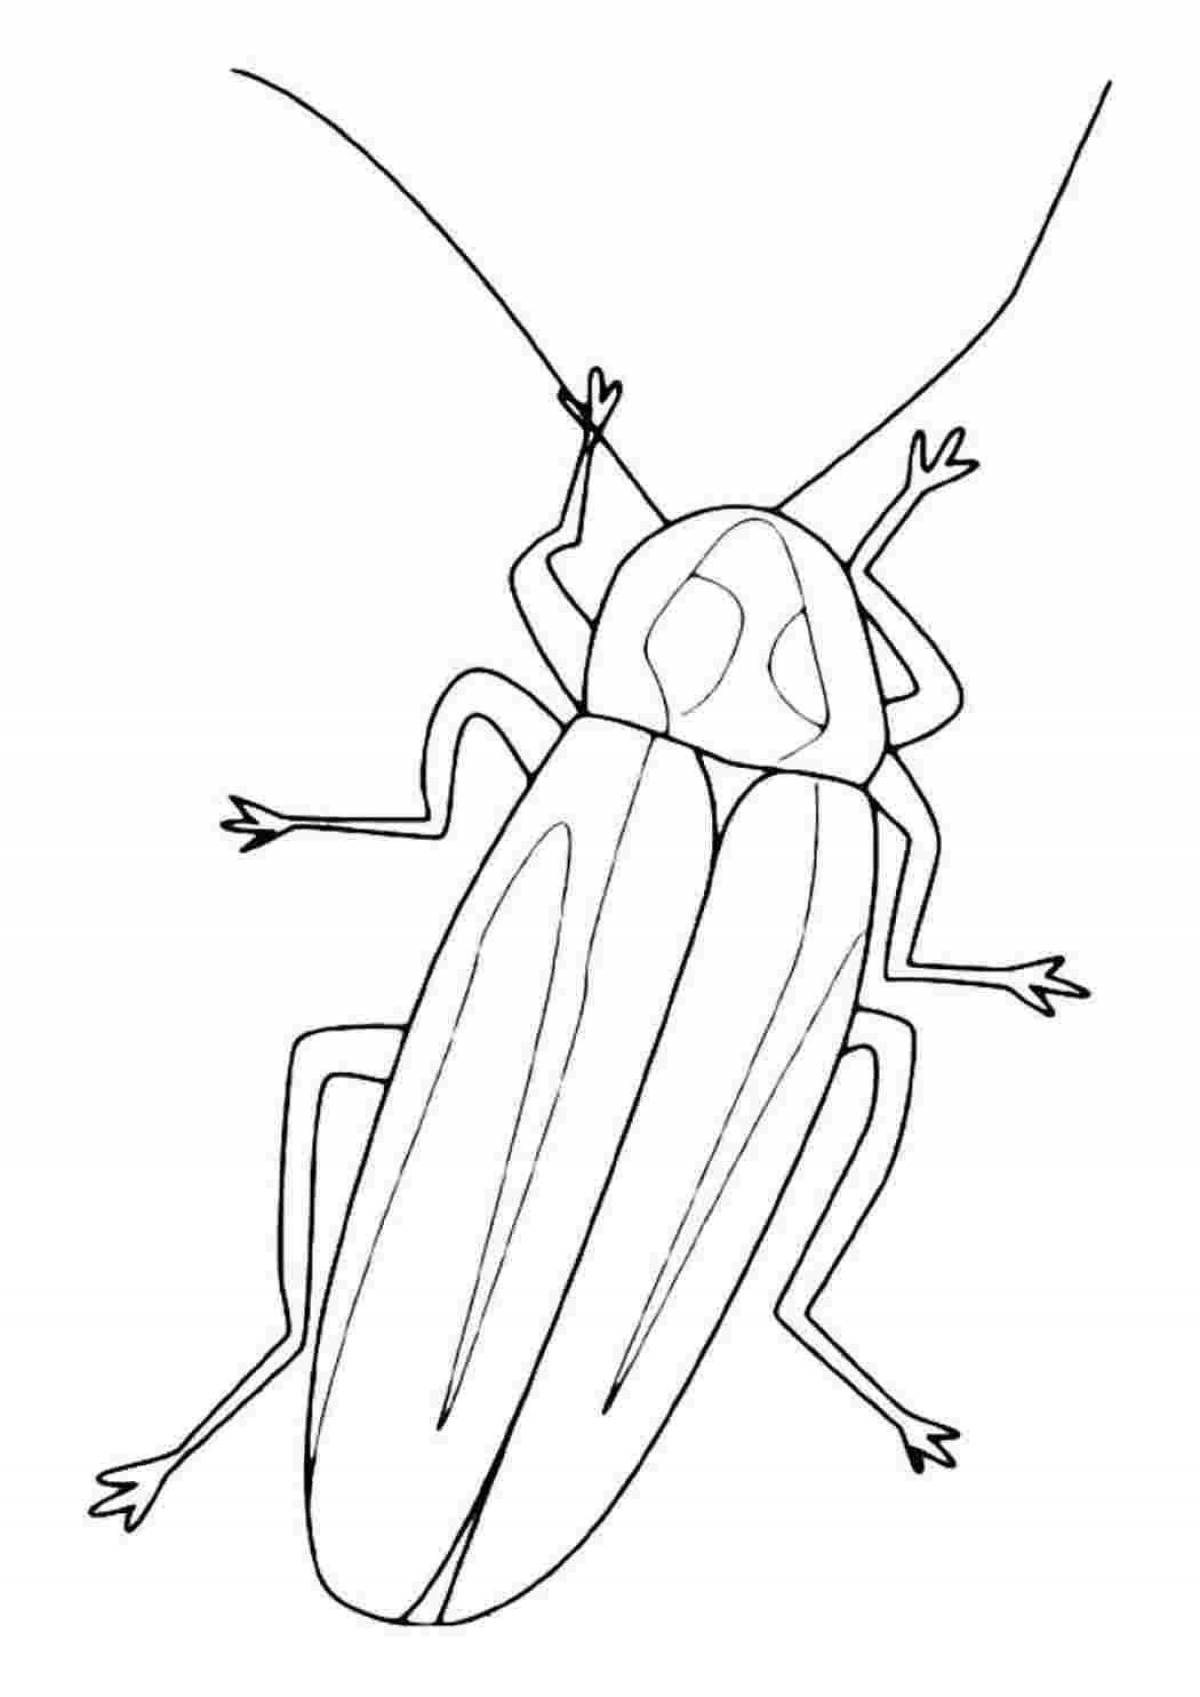 Fabulous cockroach coloring book for kids